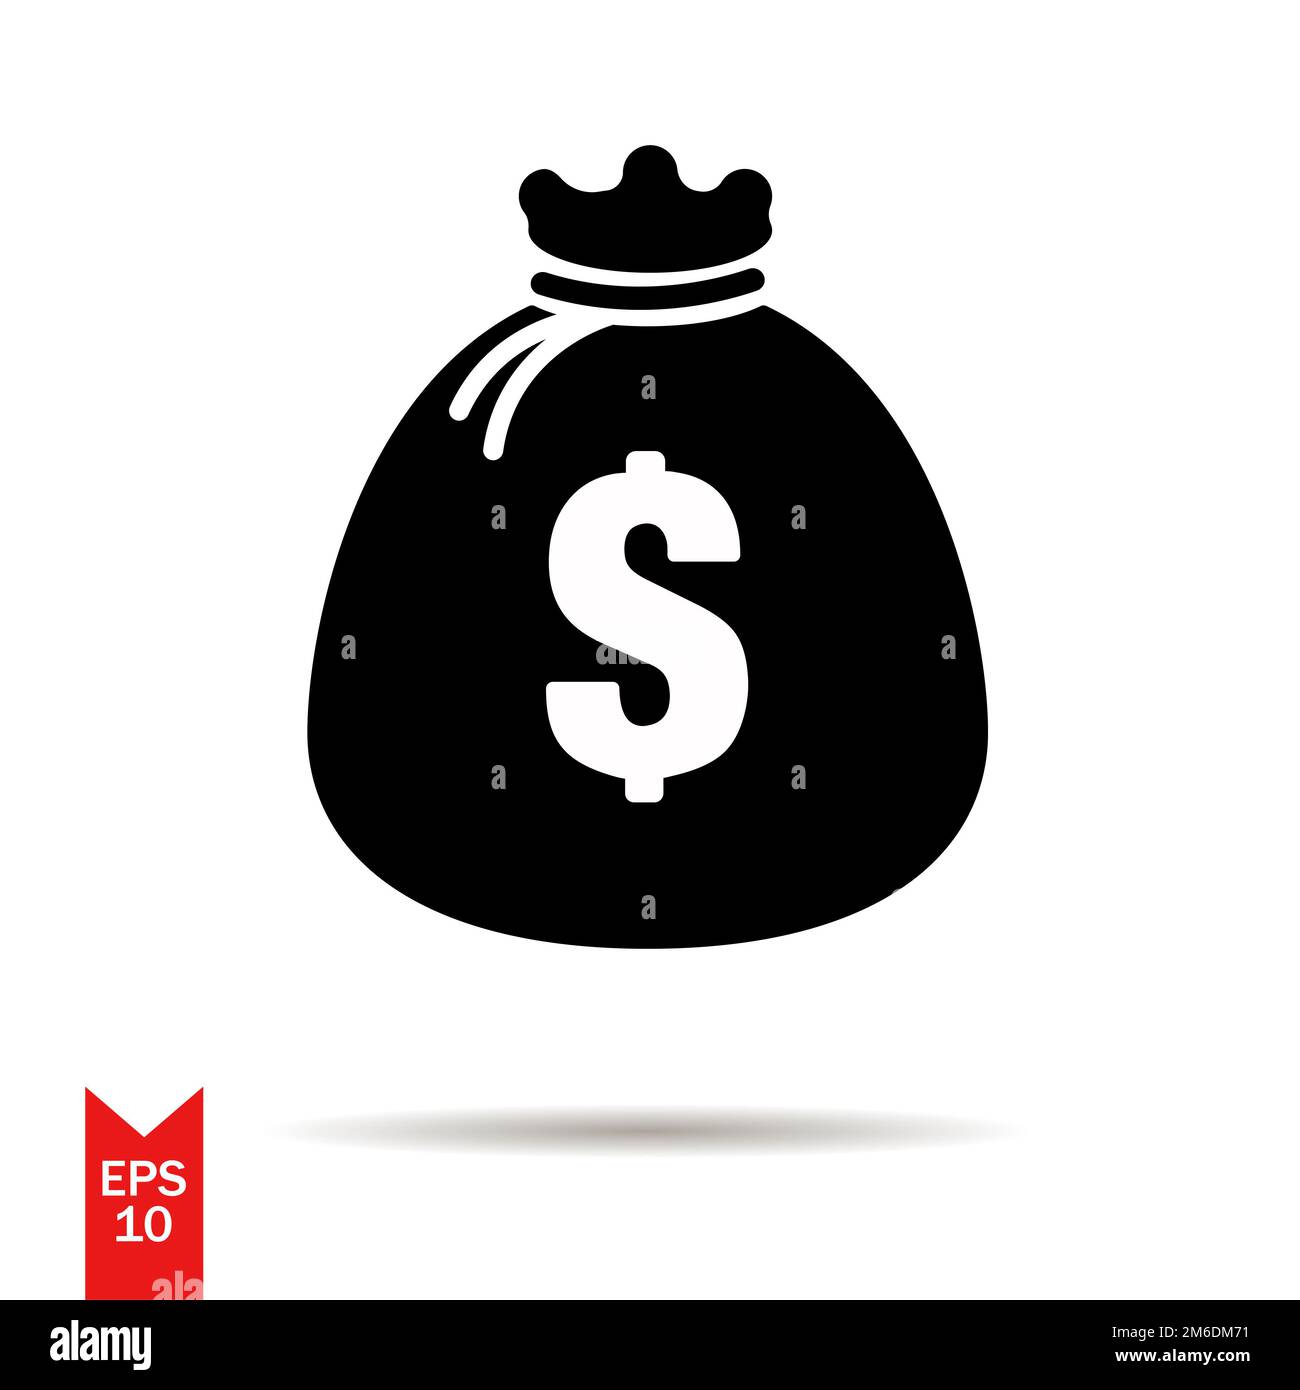 Vector icon of money bag with shadow dollar sign black color EPS 10 full of money bag dollar Stock Photo